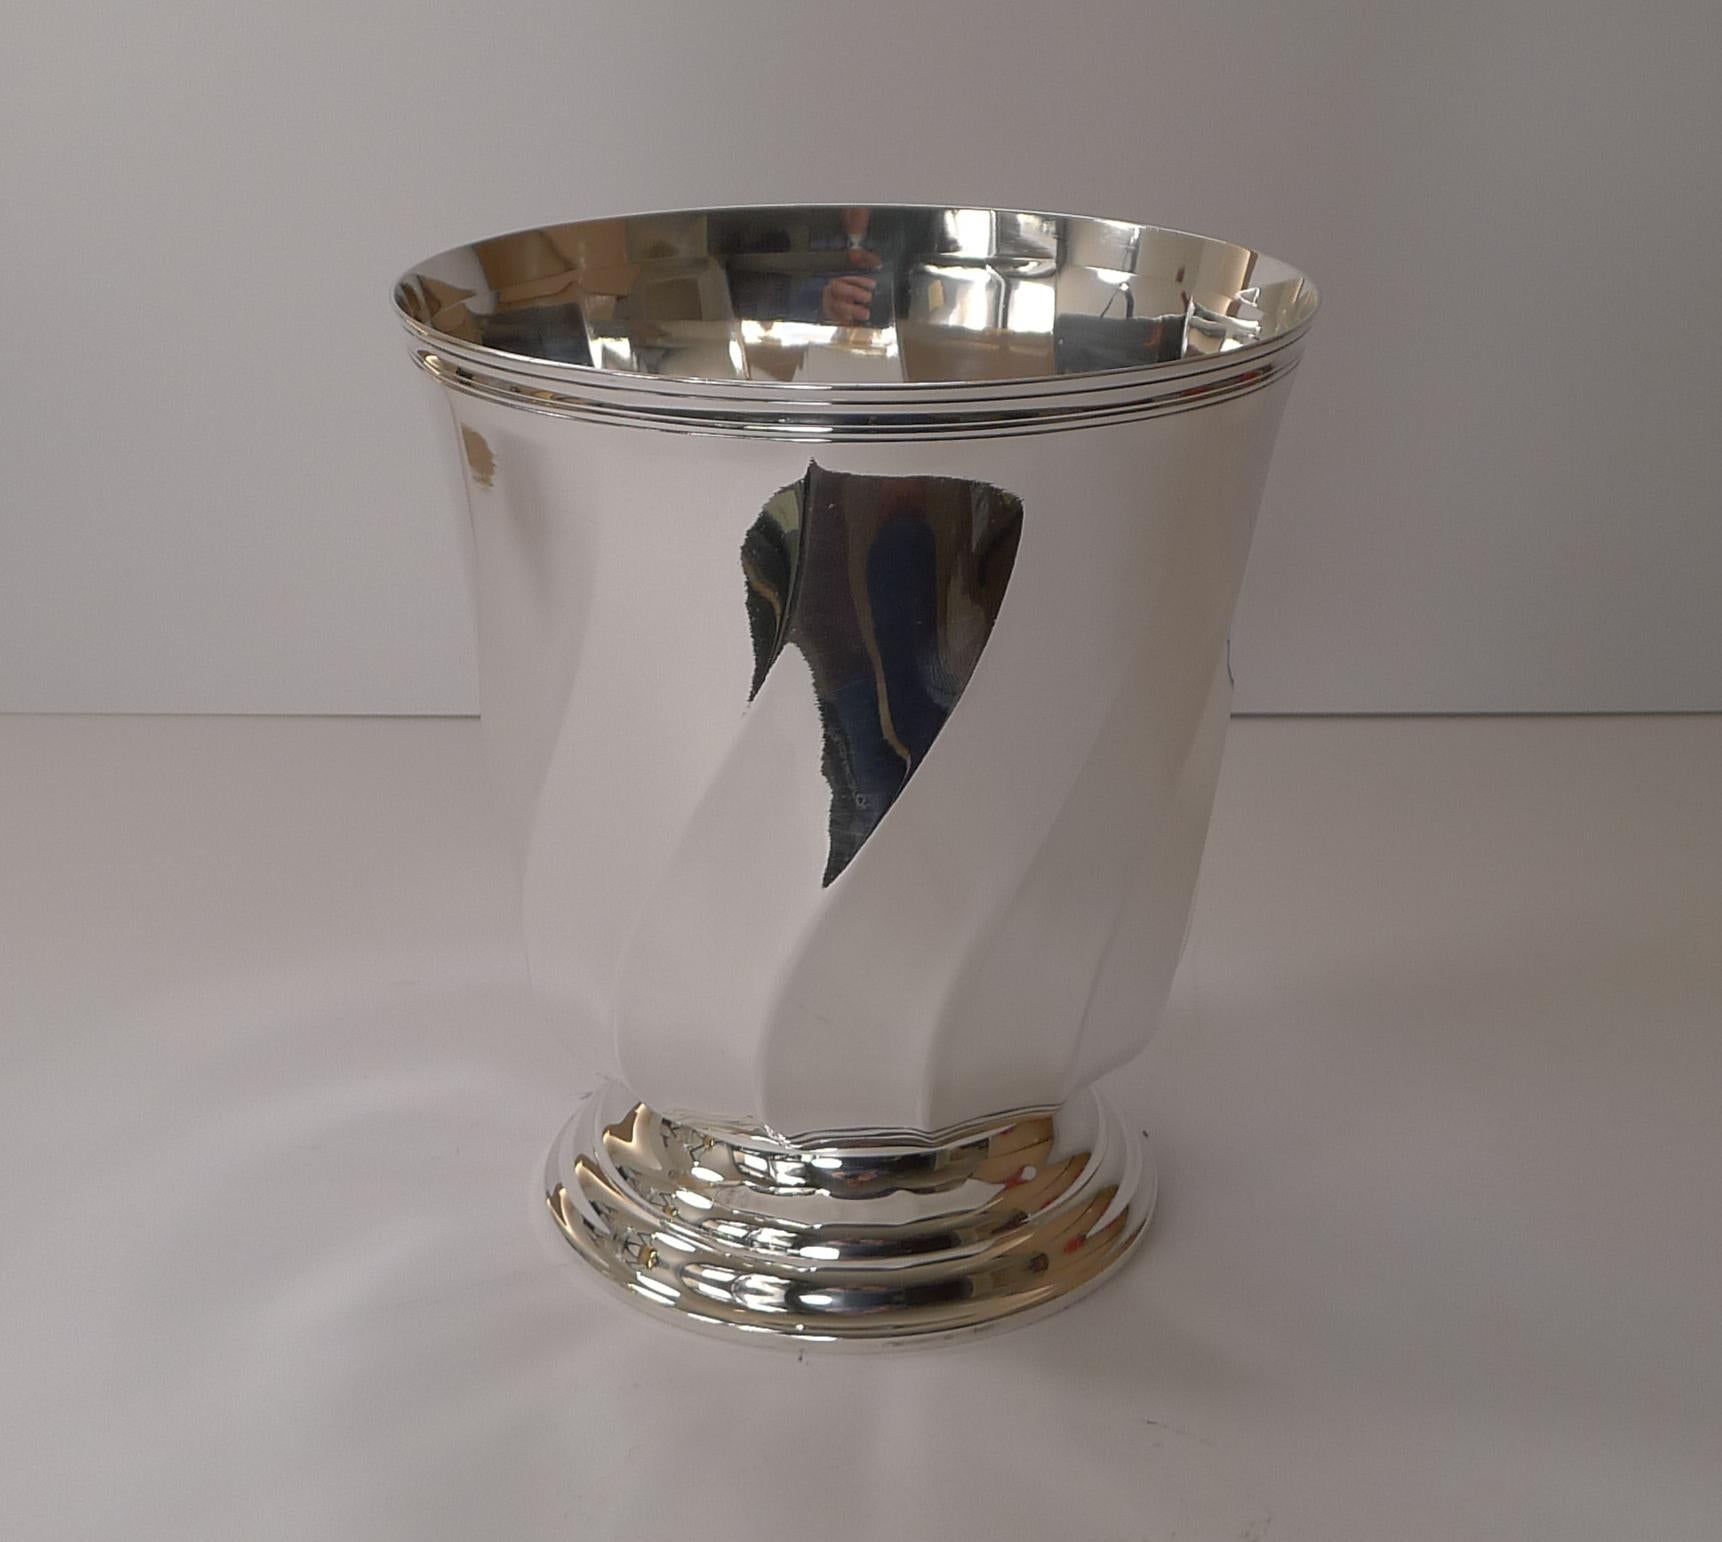 A handsome vintage French silver plated wine cooler / champagne bucket by the top notch silversmith, Christofle of Paris. Fully marked on the underside, this modernist design dates to c.1980.

Just back from our silversmith's workshop where it has